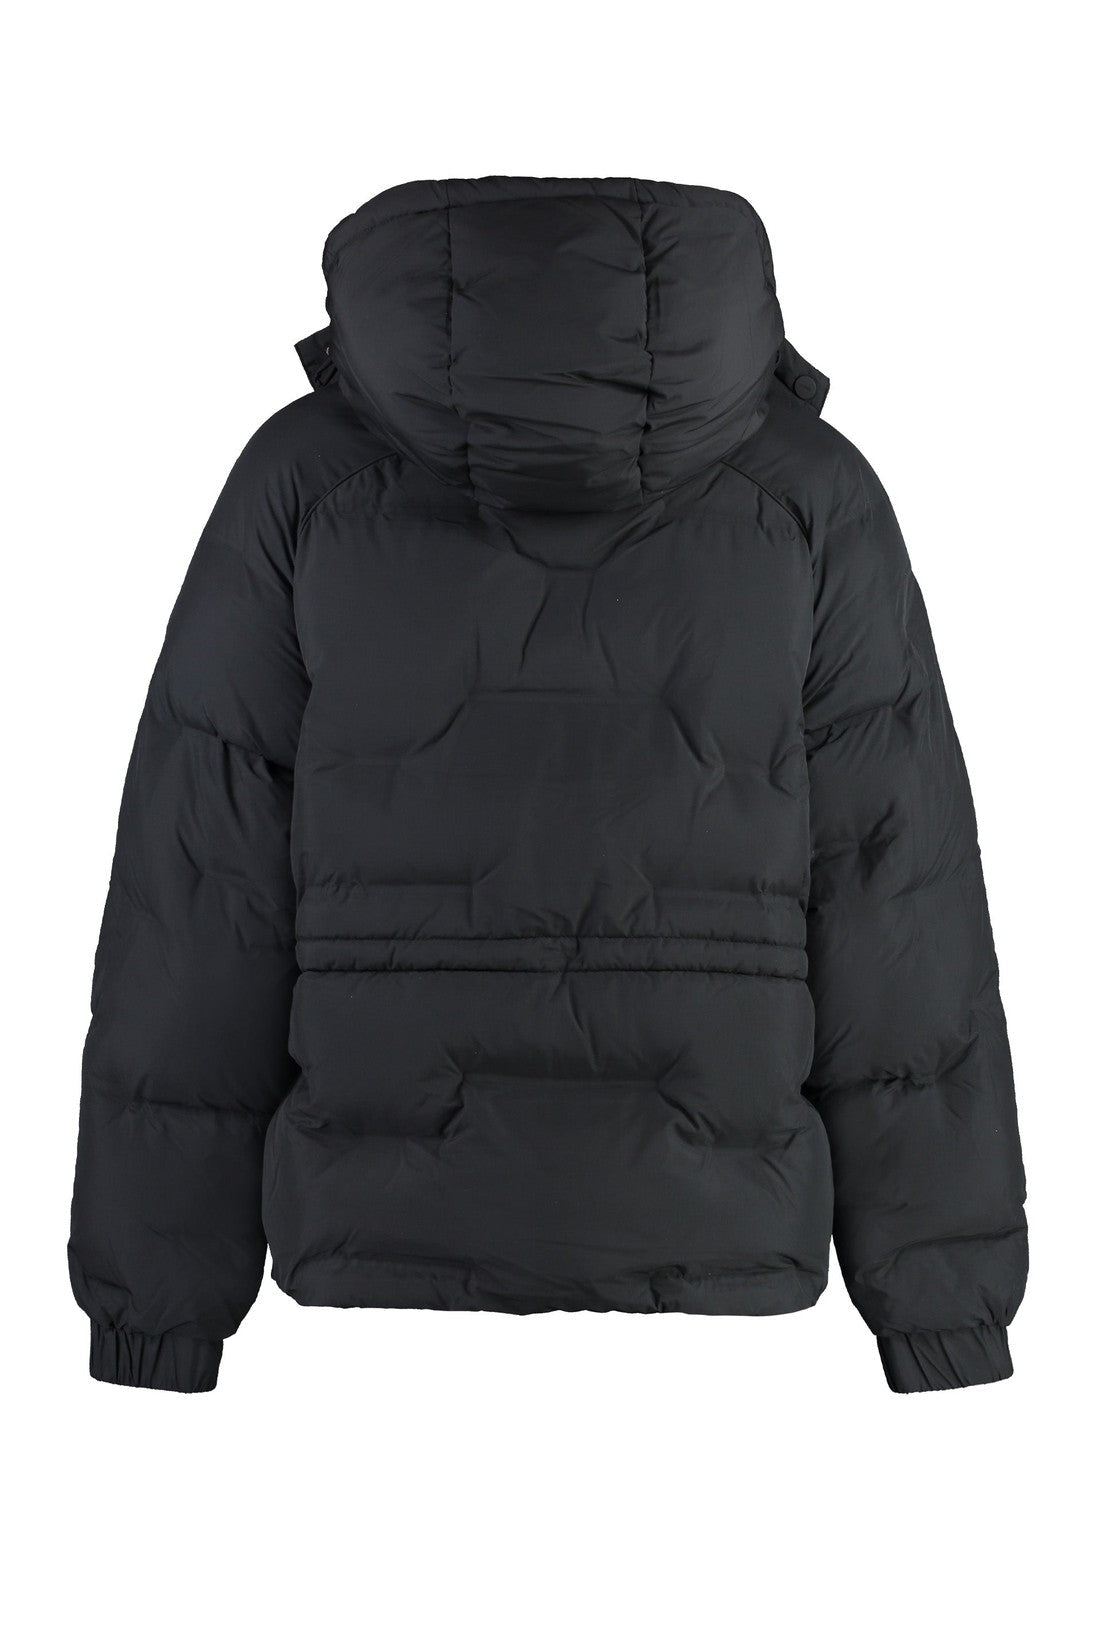 GANNI-OUTLET-SALE-Hooded techno fabric down jacket-ARCHIVIST